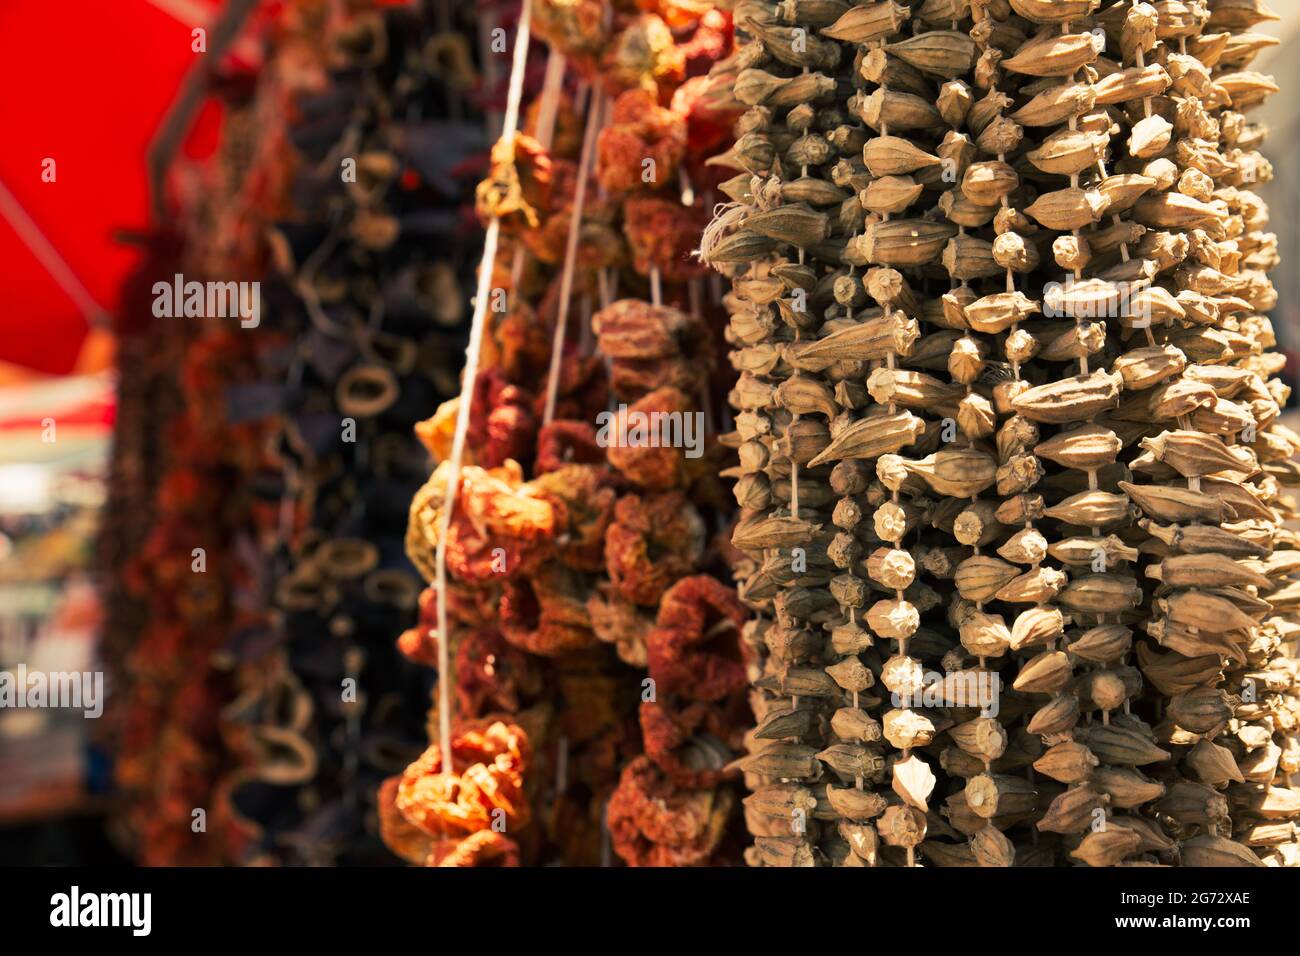 Dried okras and other vegetables in display under natural sunlight, outdoors. Stock Photo